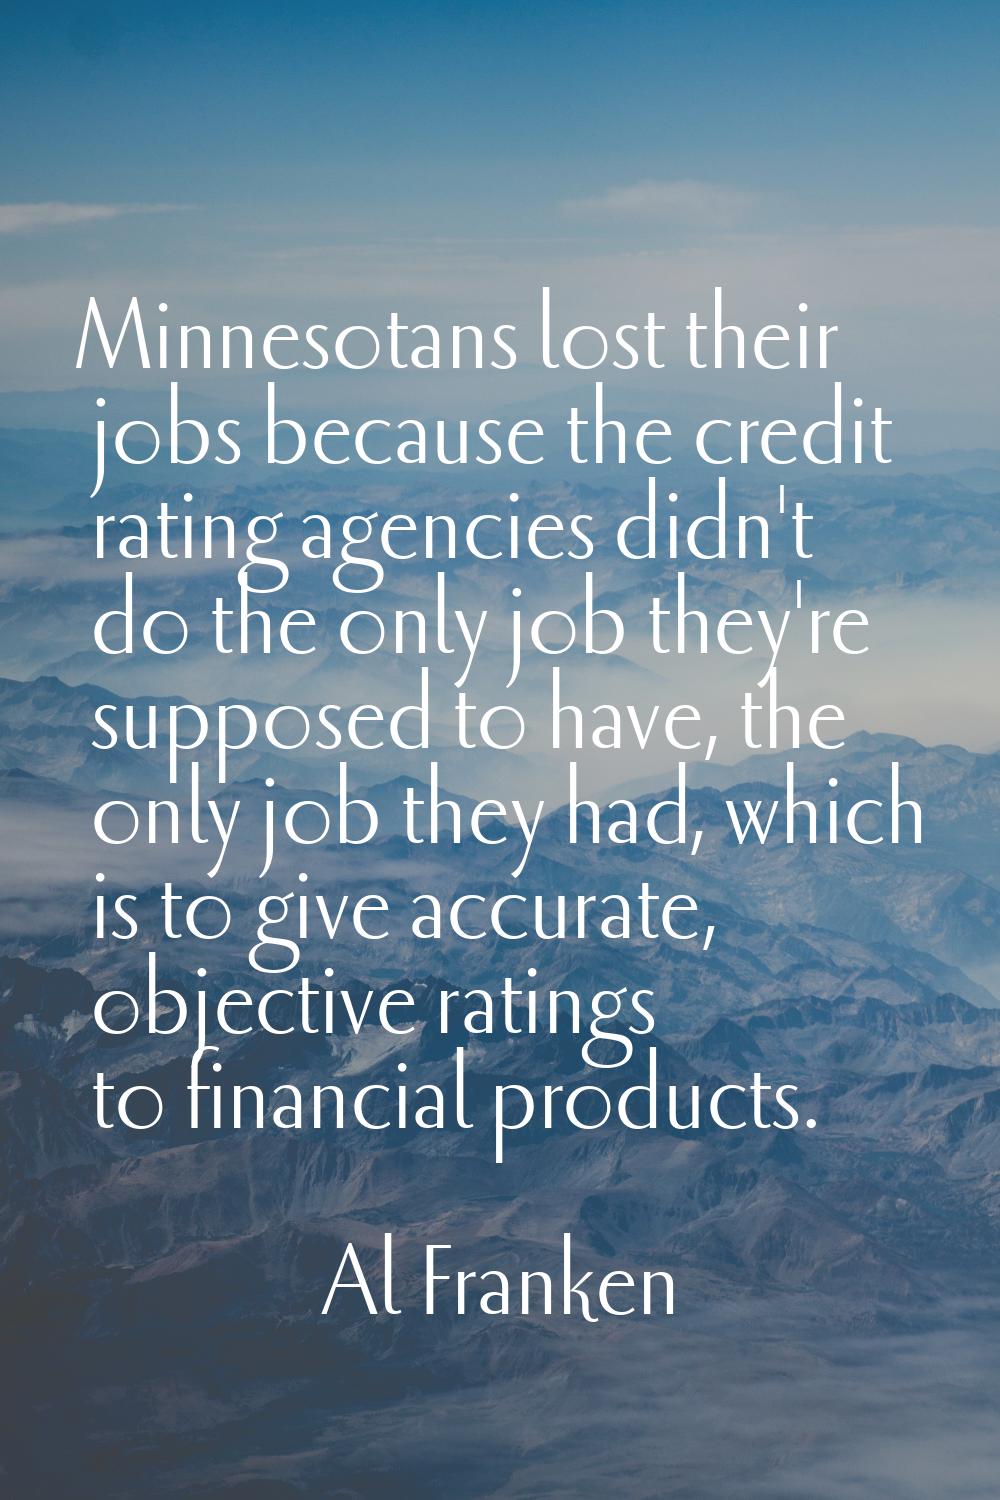 Minnesotans lost their jobs because the credit rating agencies didn't do the only job they're suppo